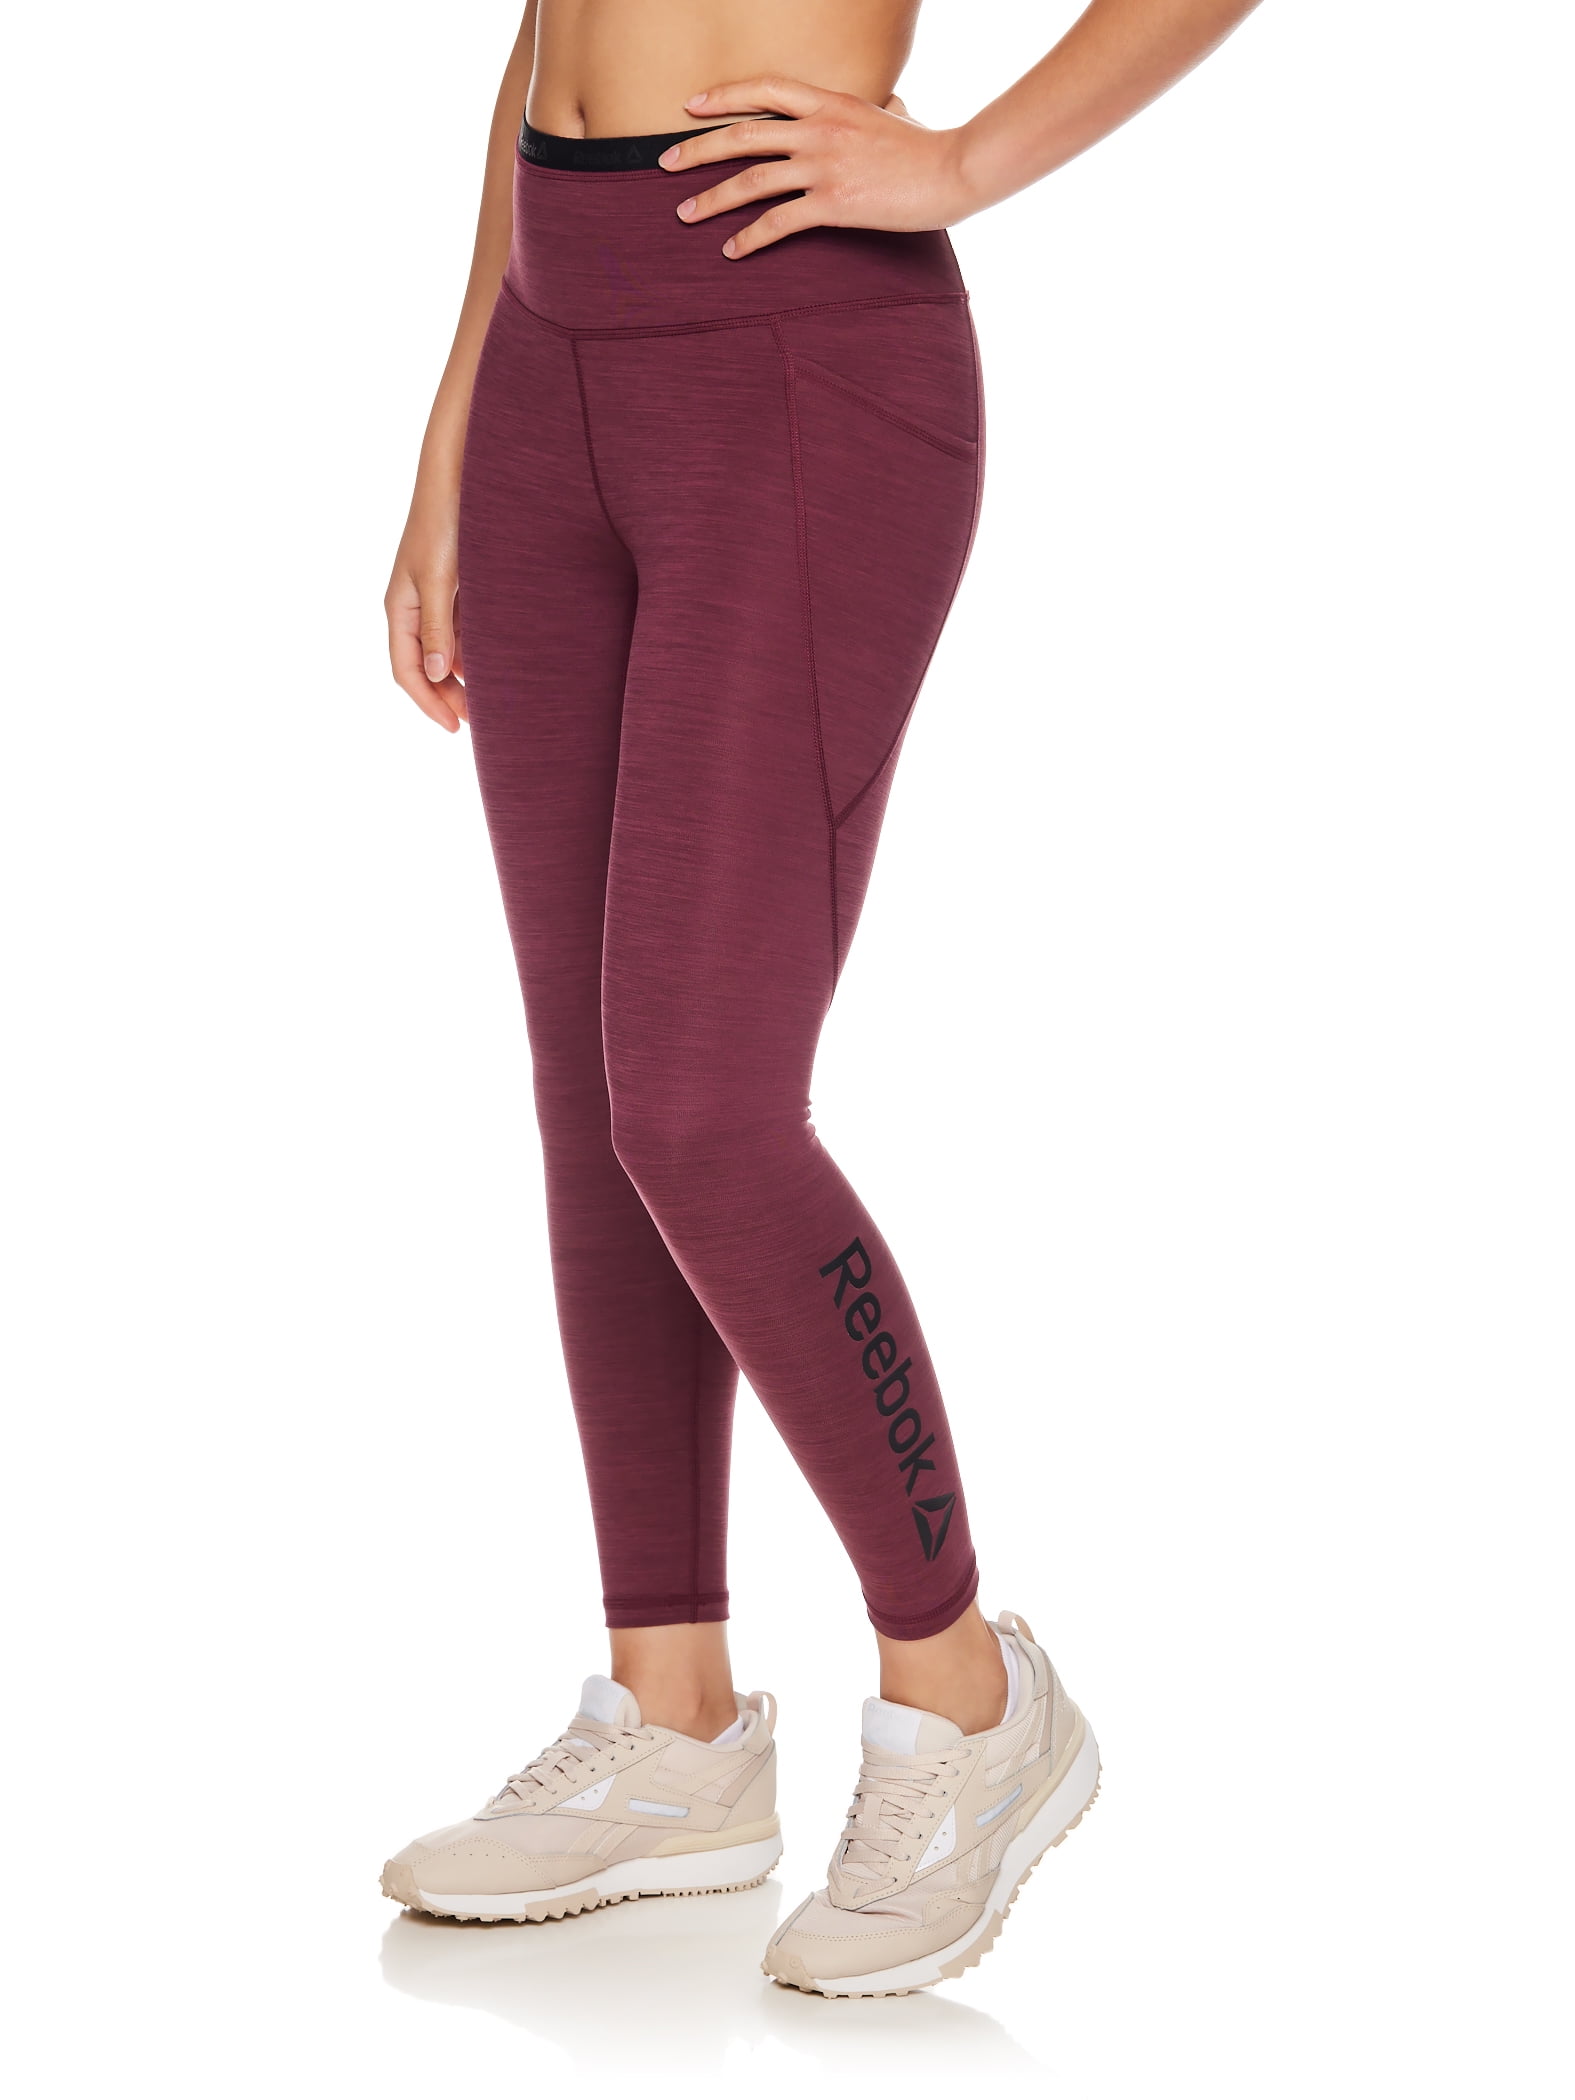 Reebok Women's Flex High Rise 7/8 Legging With Side Pockets And 25